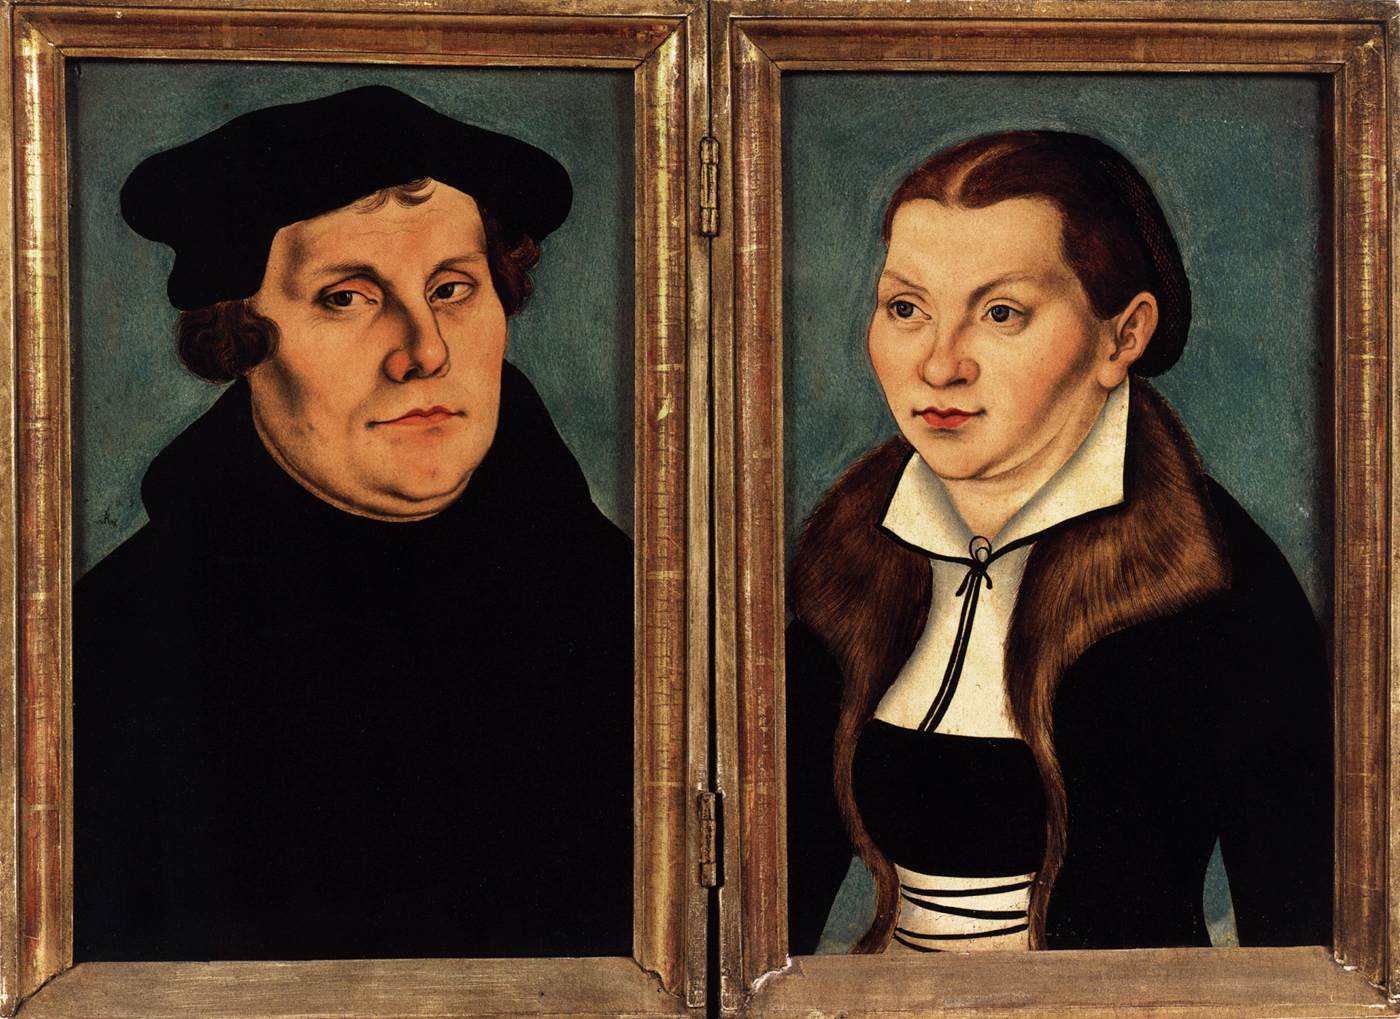 Lucas Cranach the Elder (workshop), Diptych with the Portraits of Luther and his Wife, 1529 